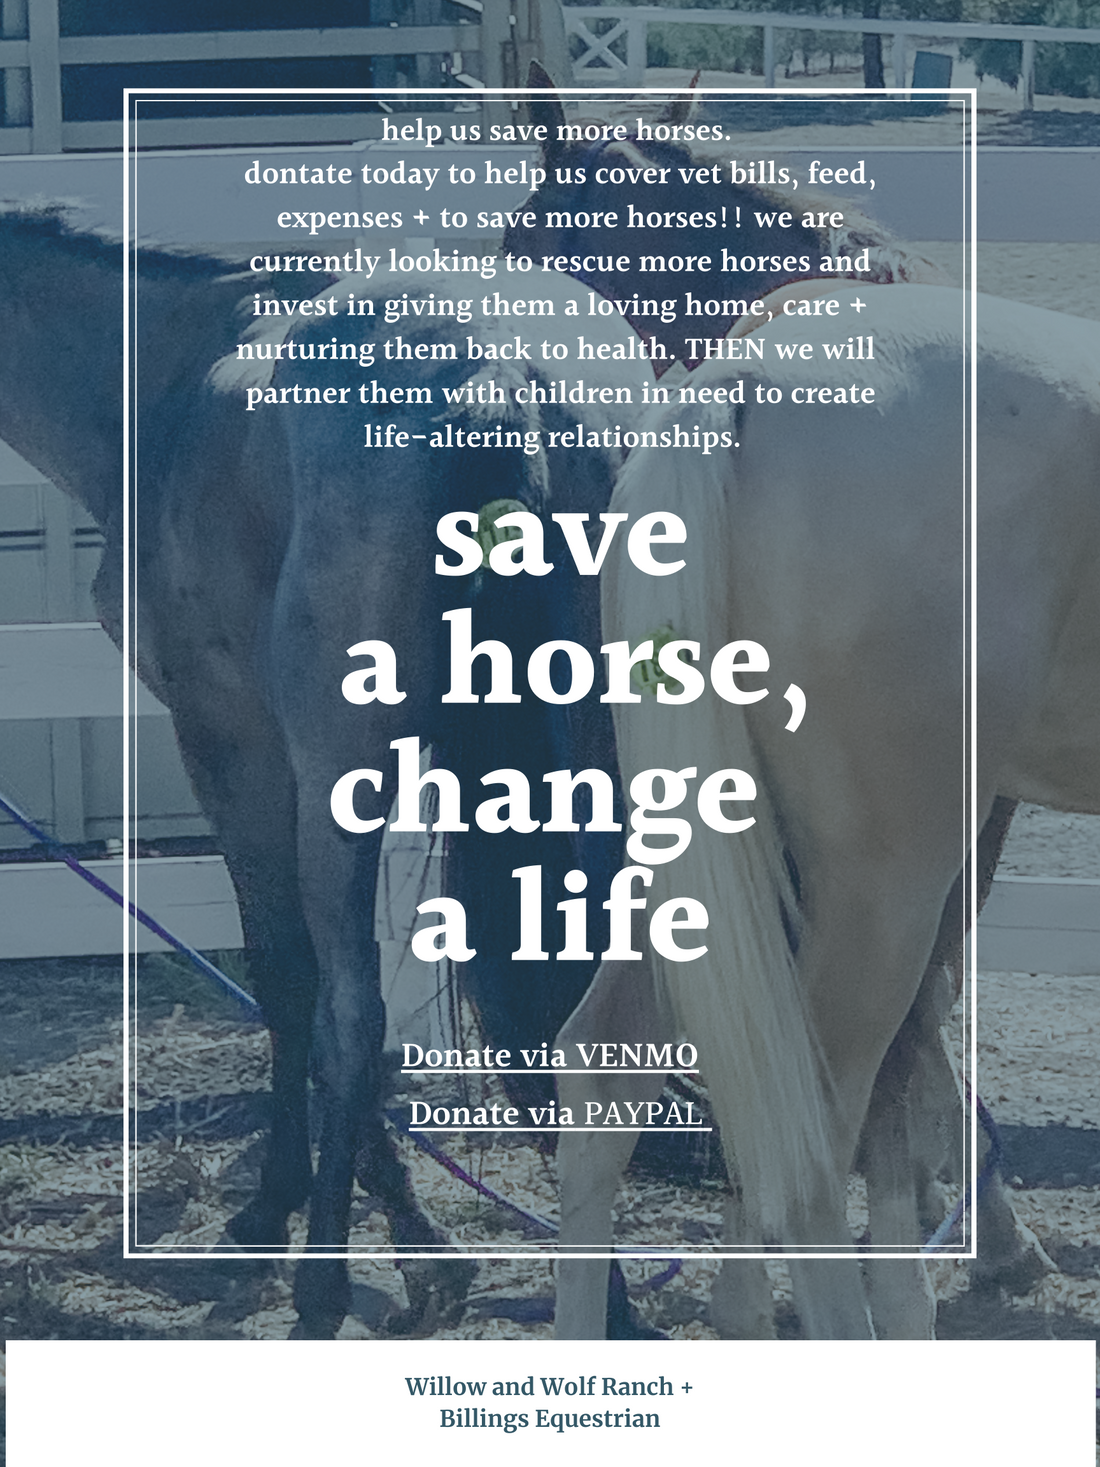 Bay area horse rescue to help kids